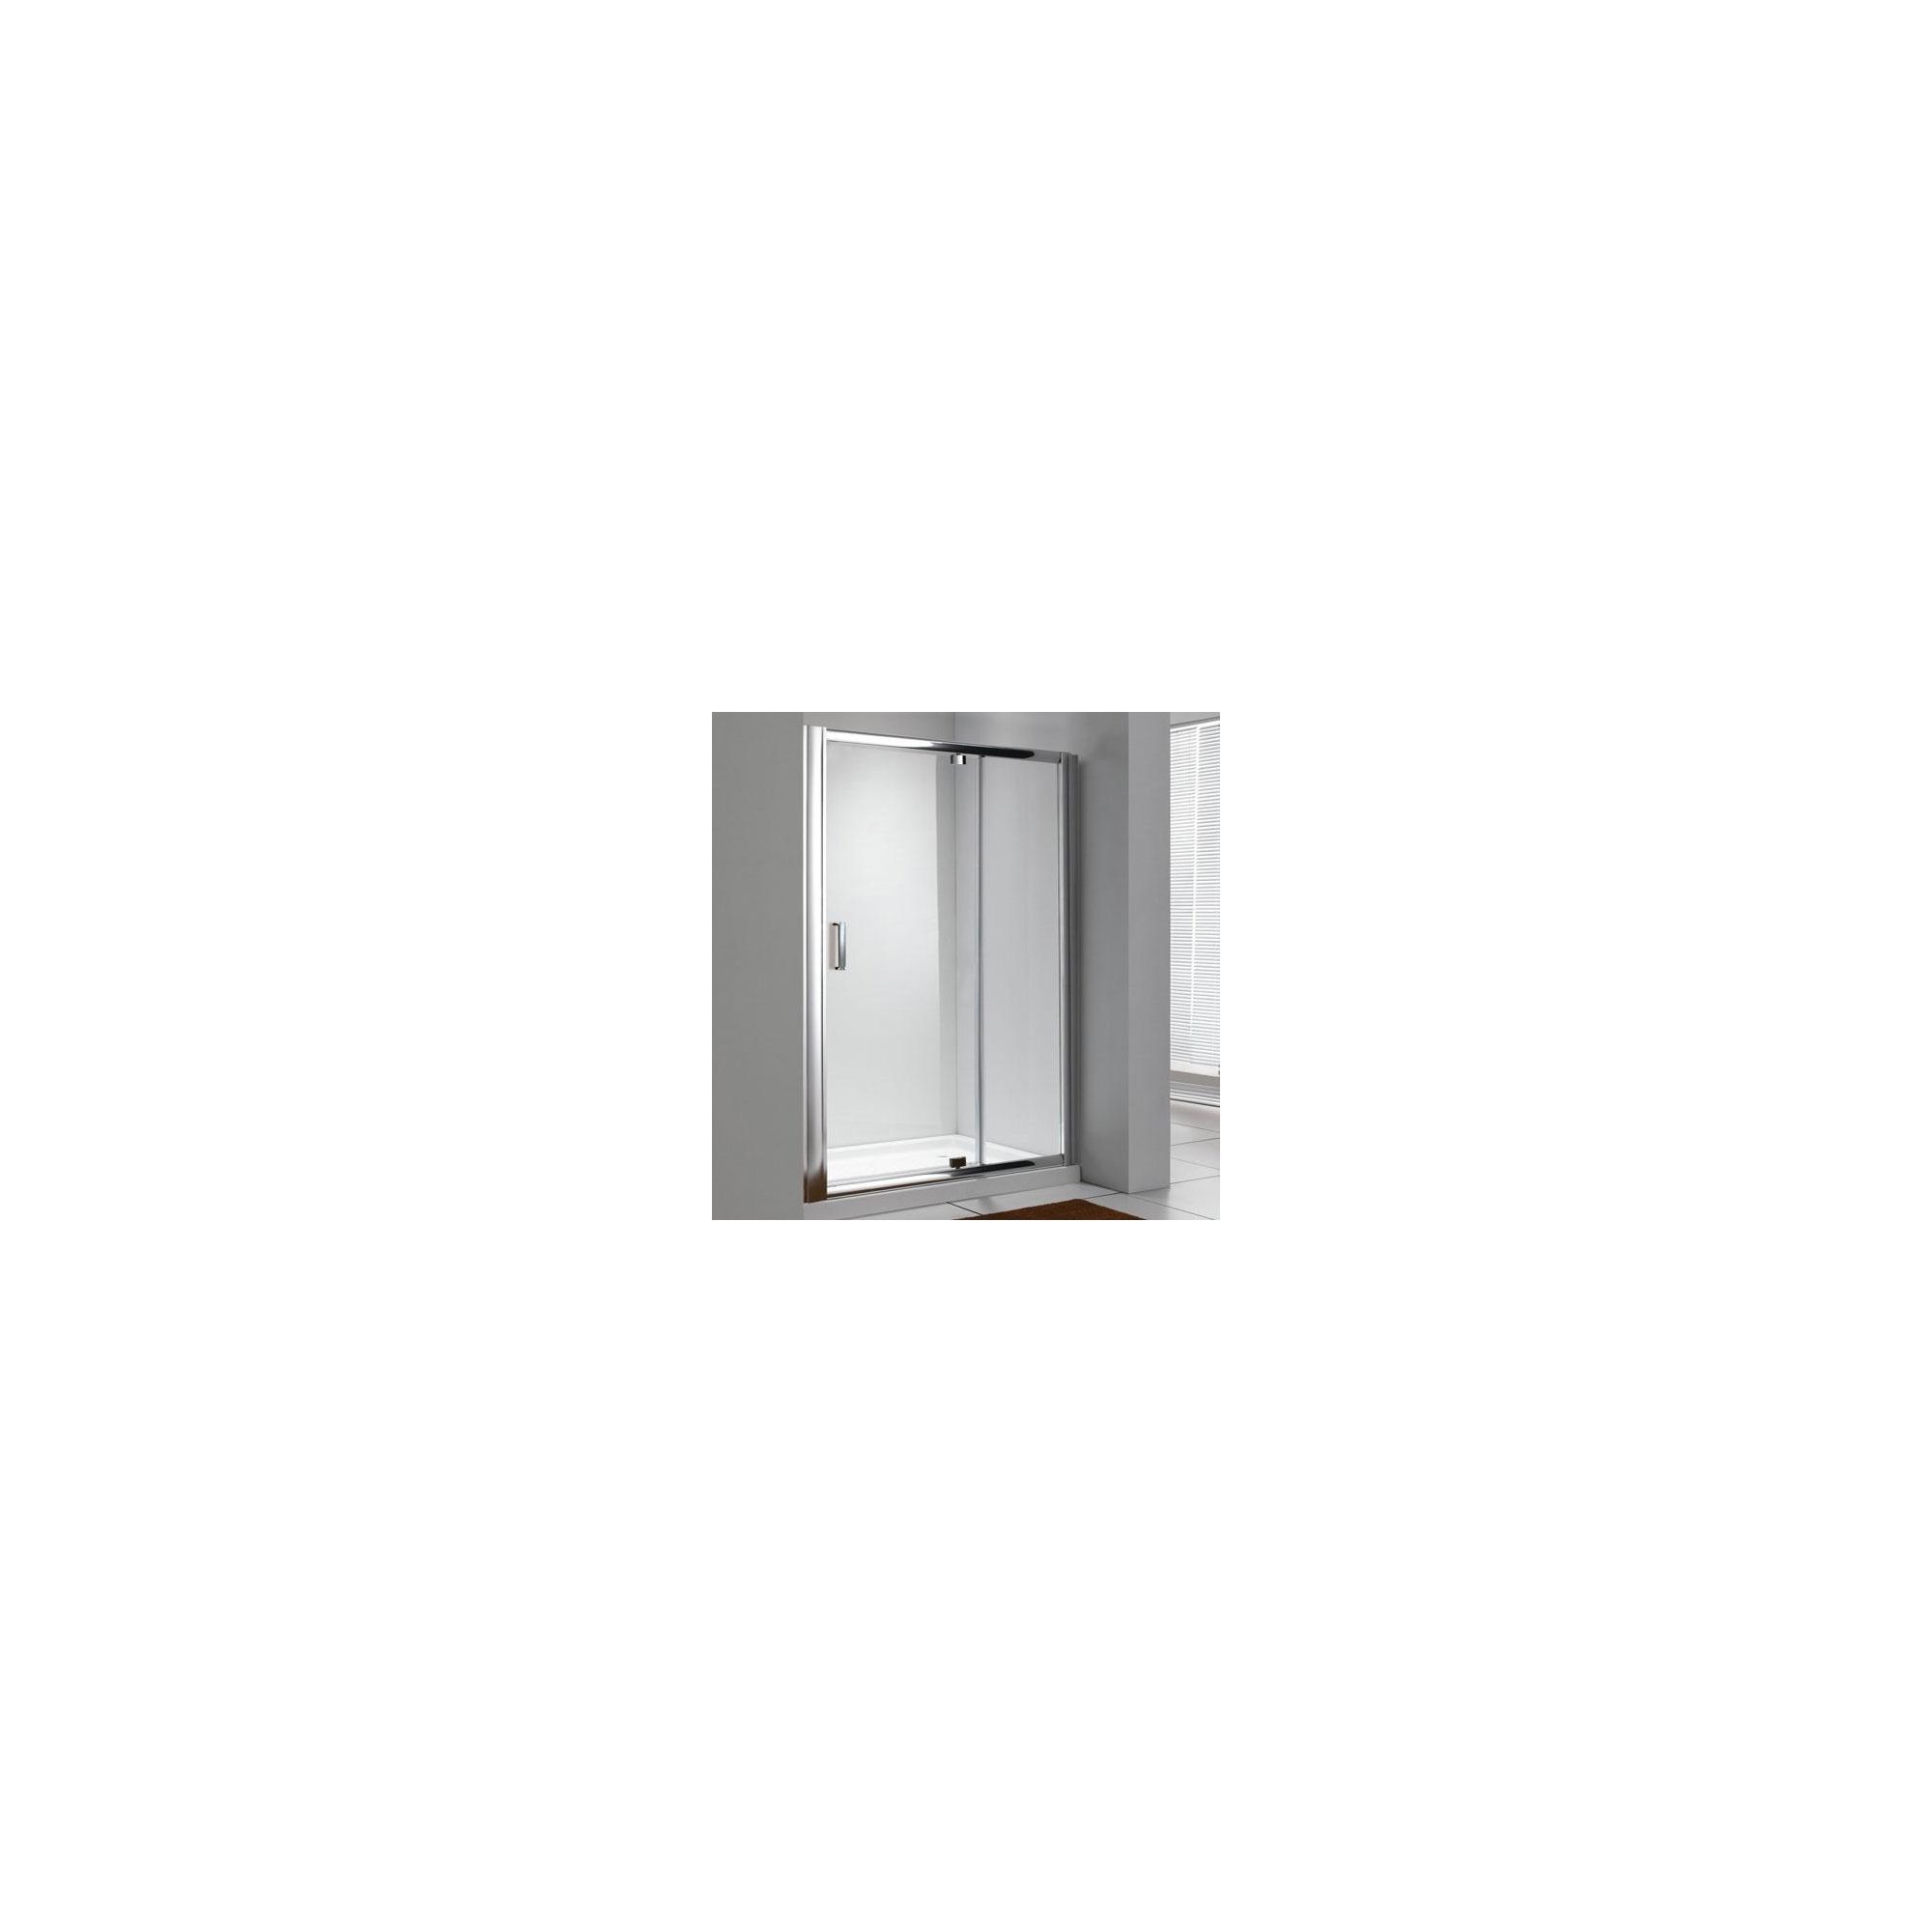 Duchy Style Pivot Door Shower Enclosure, 760mm x 760mm, 6mm Glass, Low Profile Tray at Tesco Direct